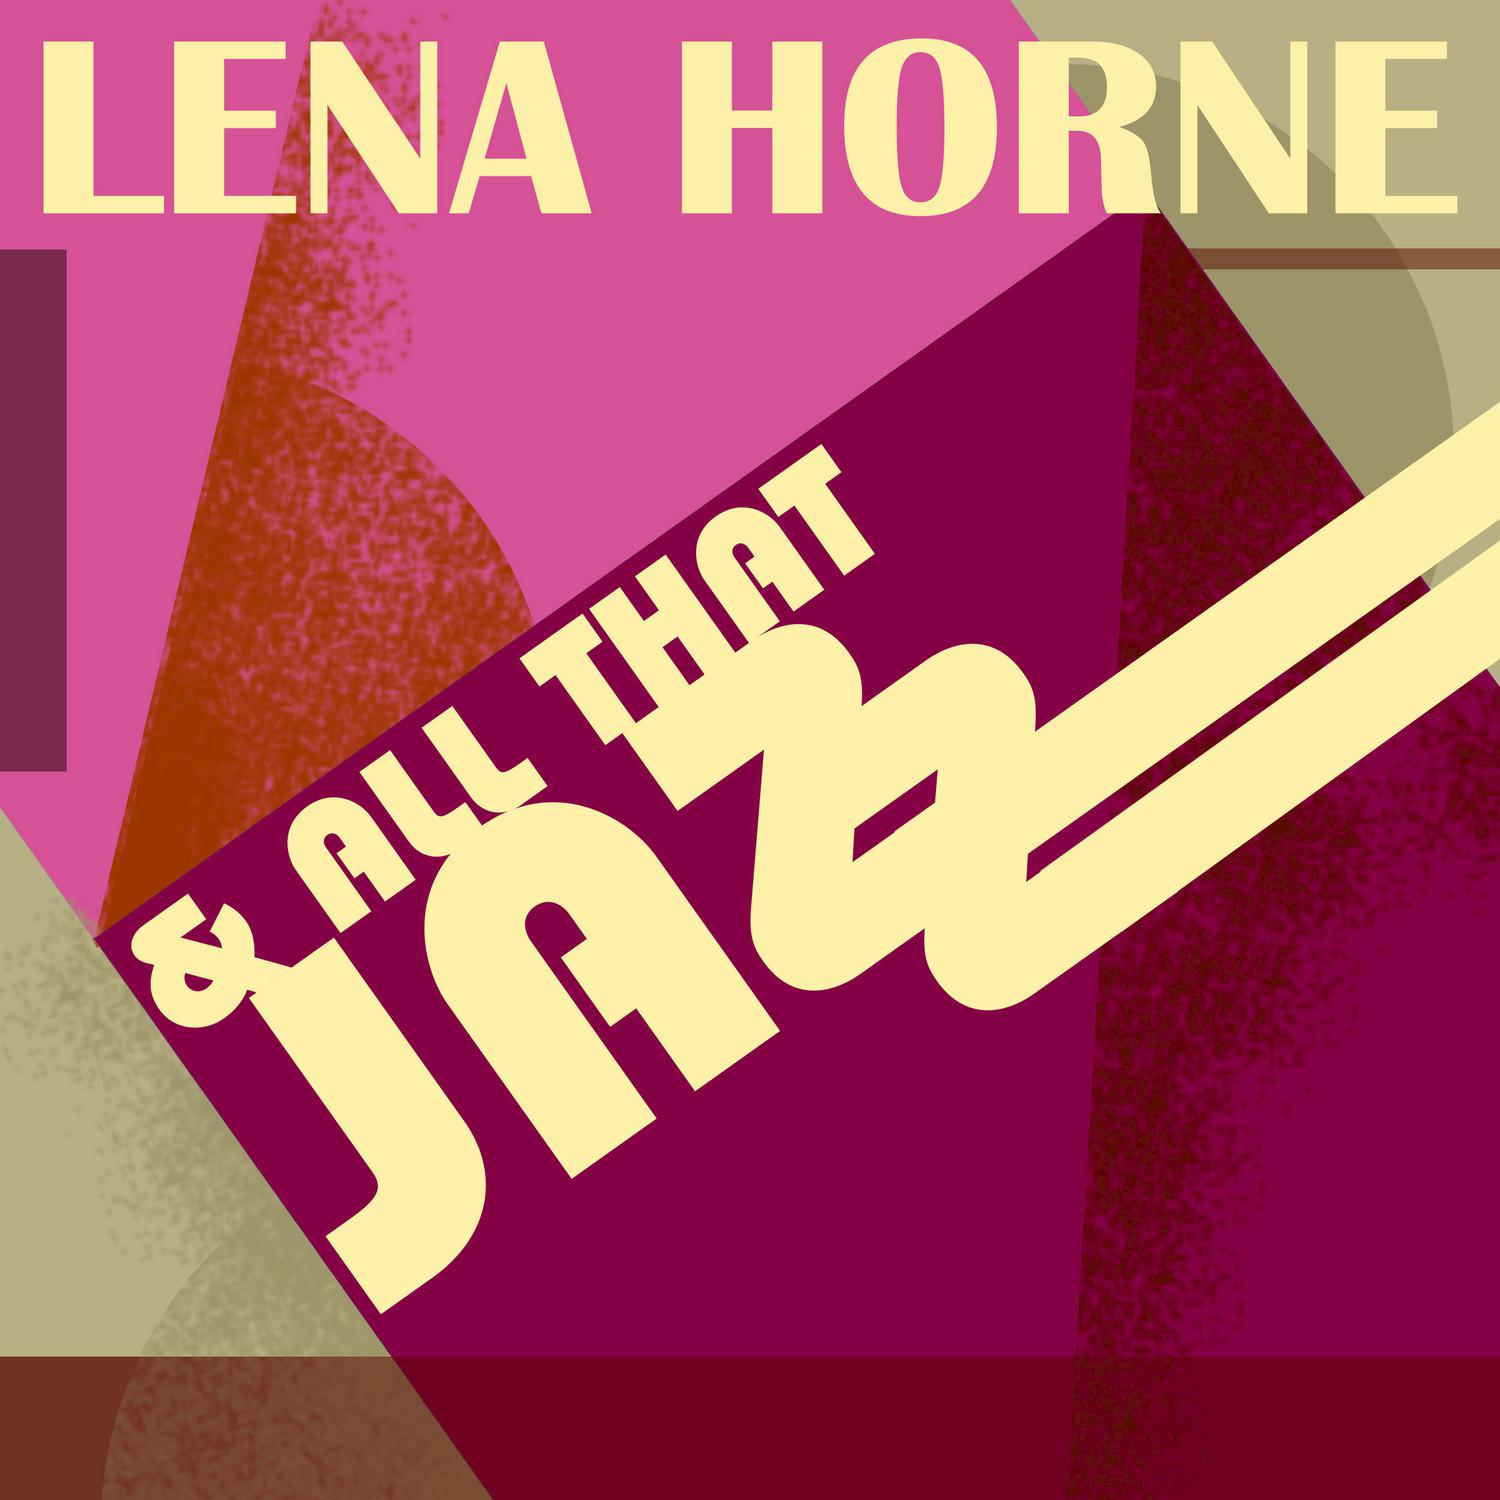 Lena Horne and All That Jazz